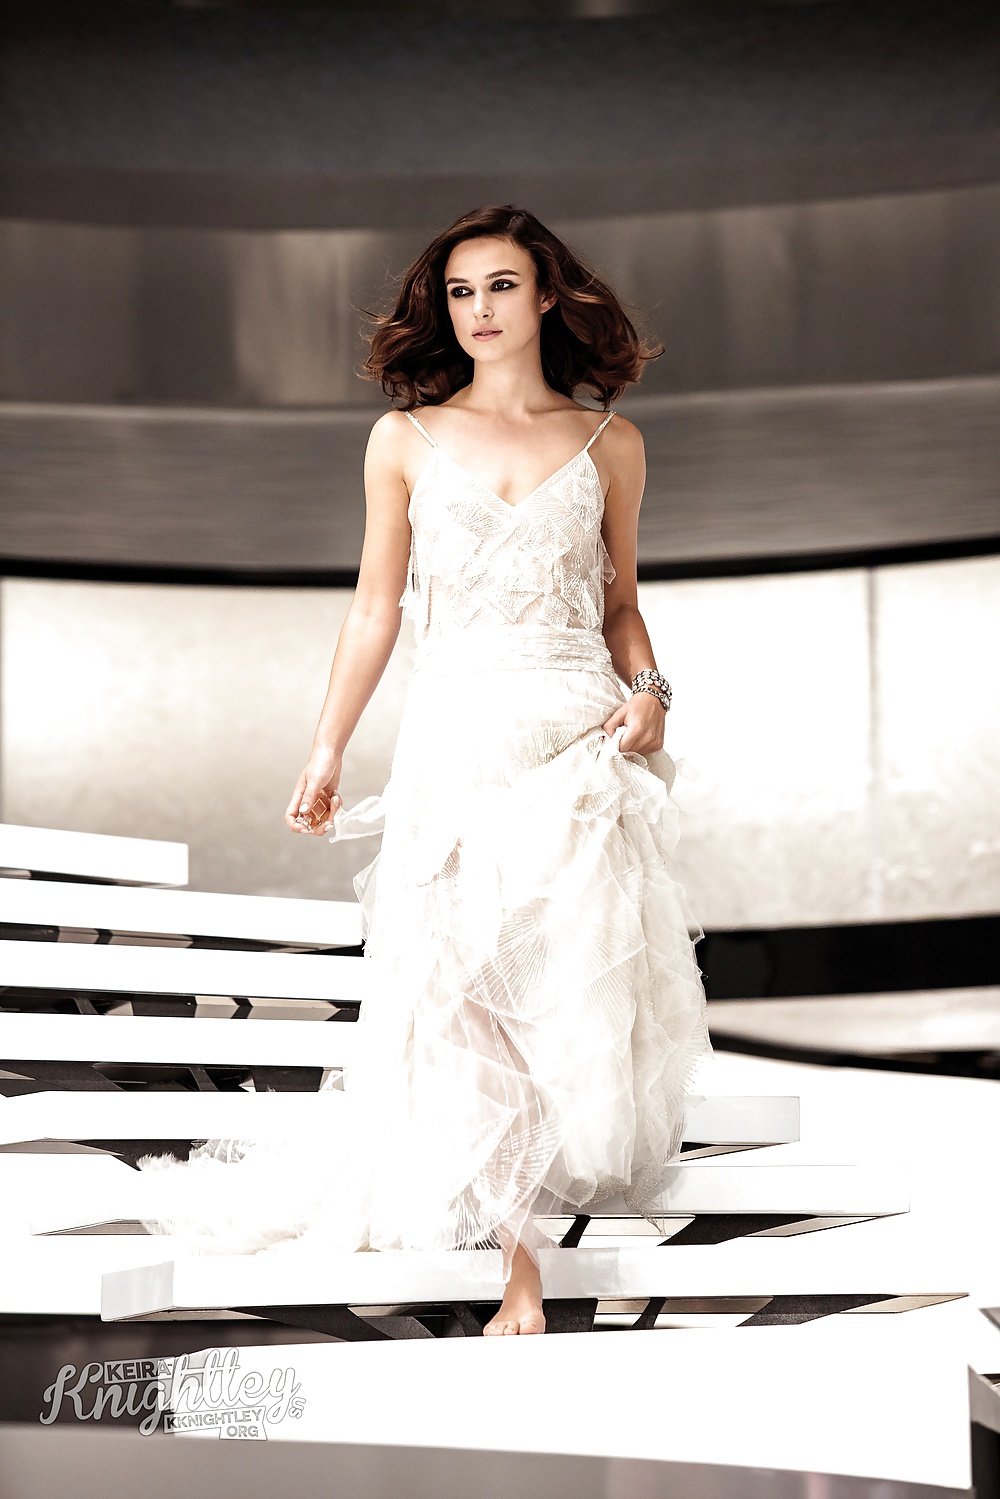 Keira Knightley The Royal Lady of England #35649671